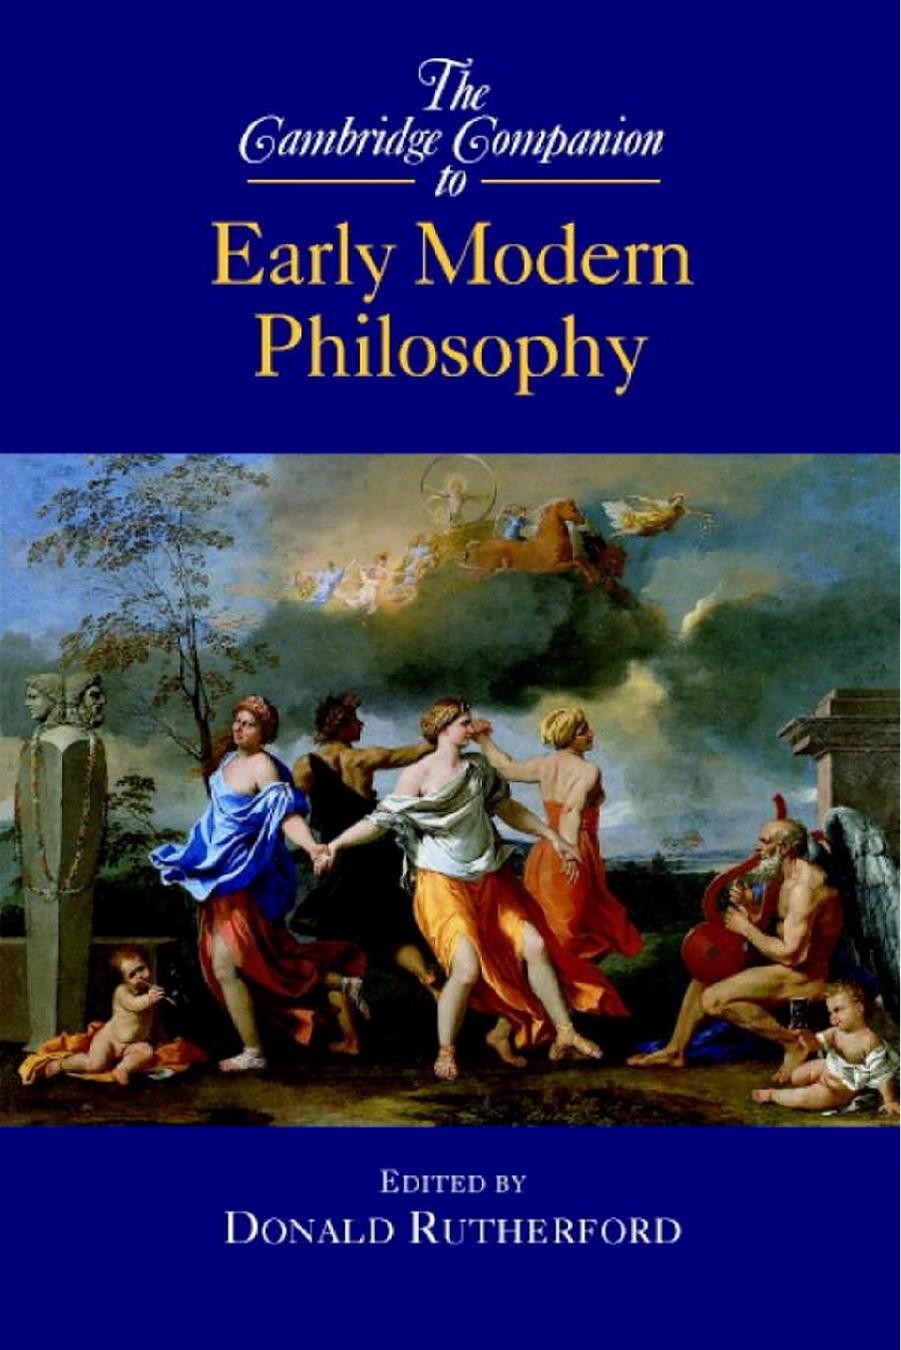 The Cambridge Companion to Early Modern Philosophy